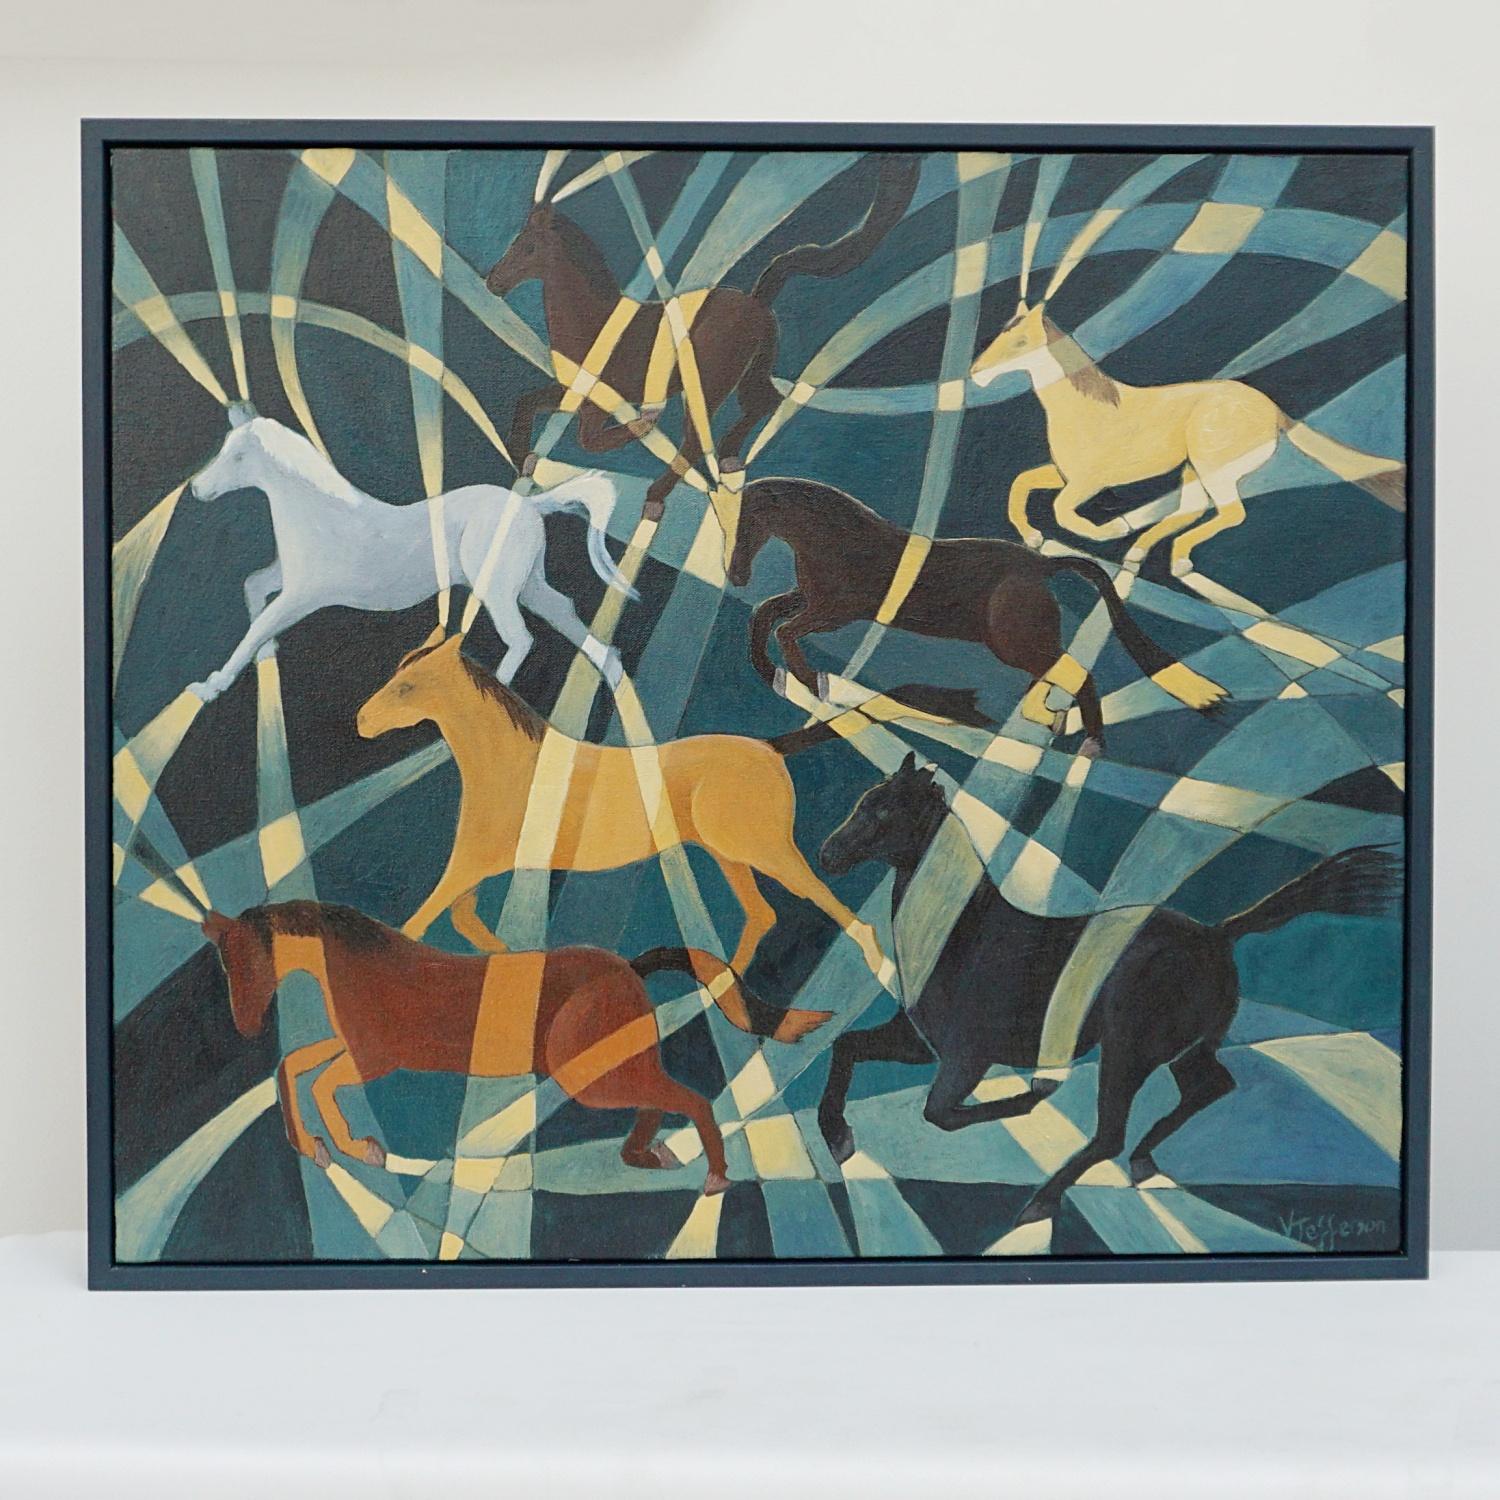 'Wild Horses' An Art Deco style contemporary painting by Vera Jefferson depicting galloping horses amongst a stylised background. Signed V Jefferson to lower right. 

Dimensions: H 62.5cm W 72.5cm D 5cm

Vera Jefferson trained at Goldsmiths College,